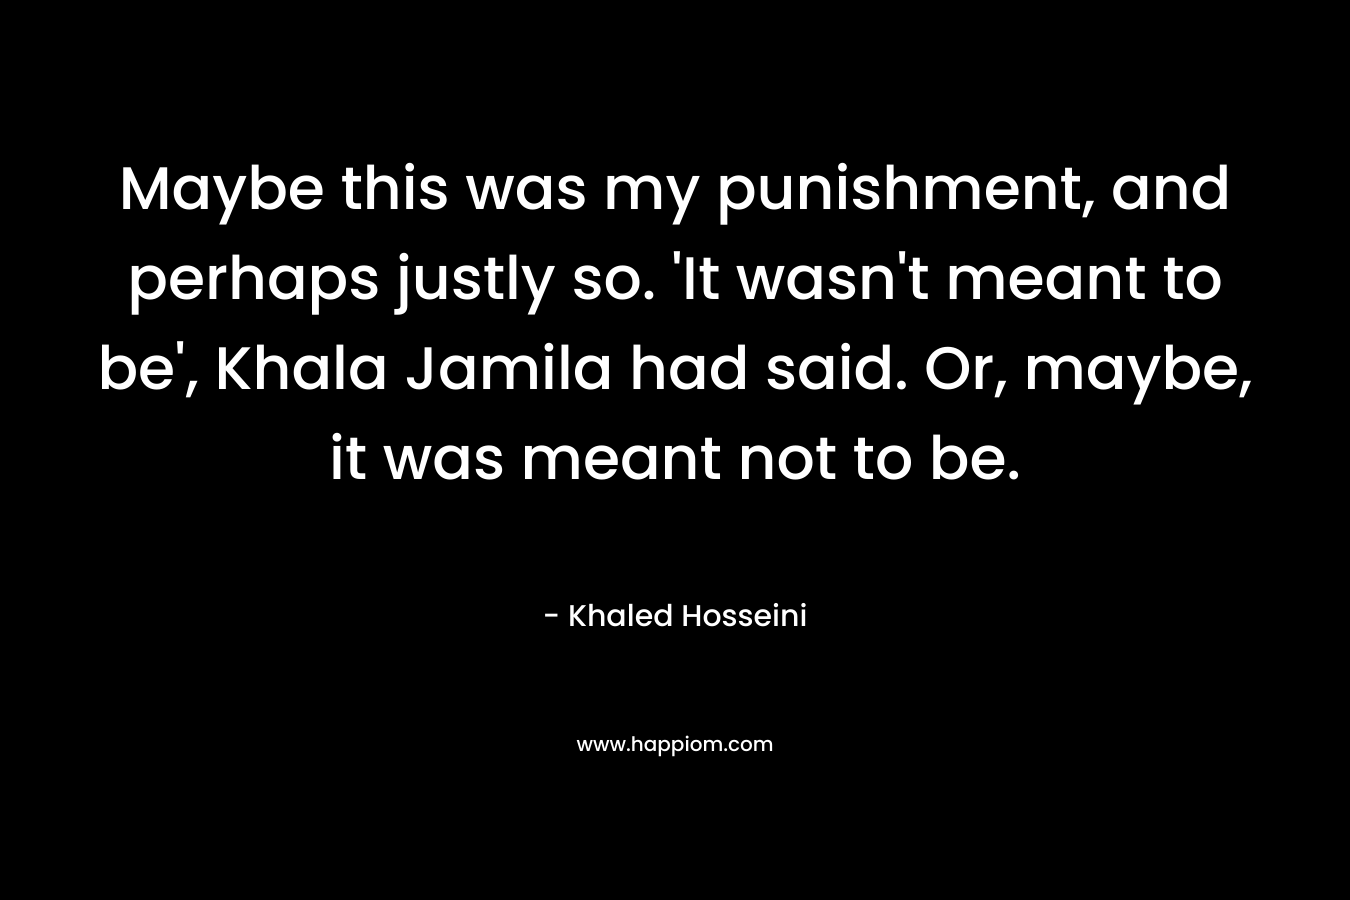 Maybe this was my punishment, and perhaps justly so. ‘It wasn’t meant to be’, Khala Jamila had said. Or, maybe, it was meant not to be. – Khaled Hosseini